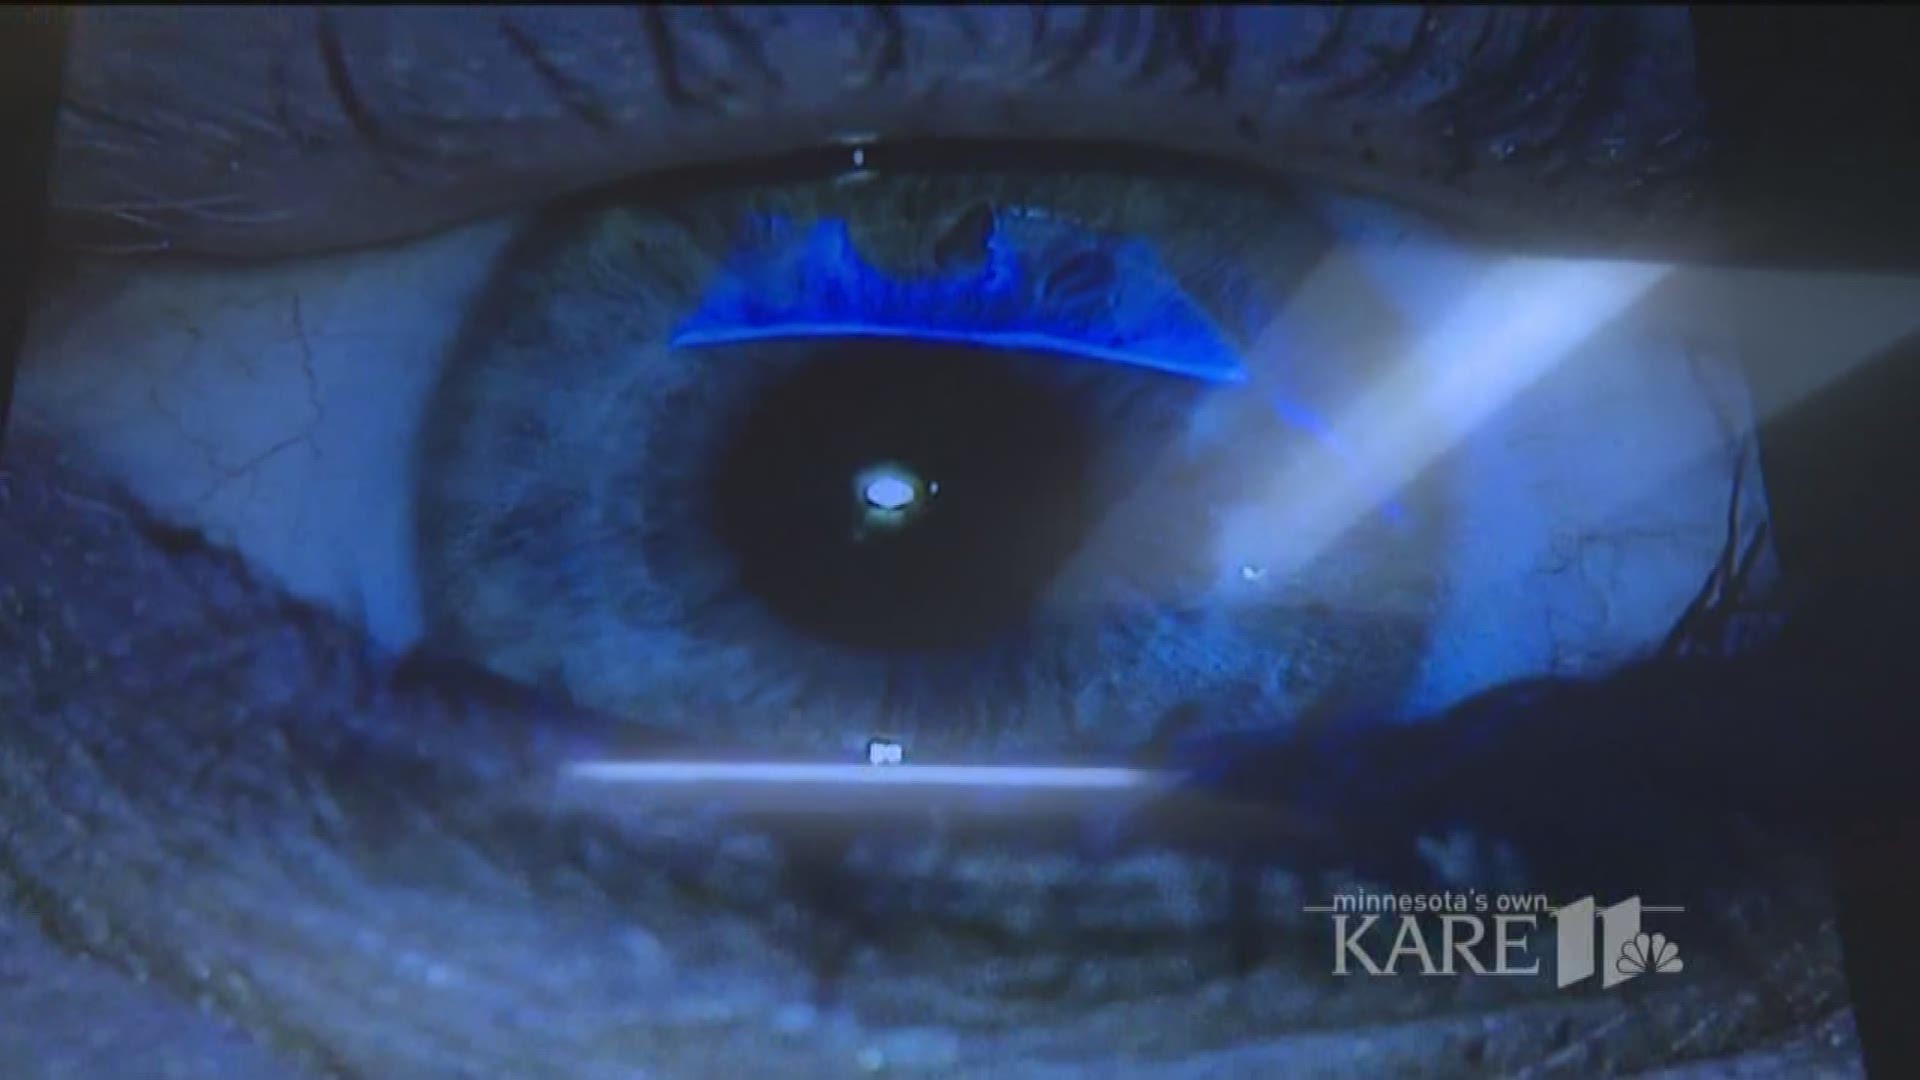 You've heard of Lasik. But have you heard of Smile? It's a new type of technology to correct your vision, and it's only offered at 30 places in the country. Bloomington is one of them. http://kare11.tv/2vcPFVU